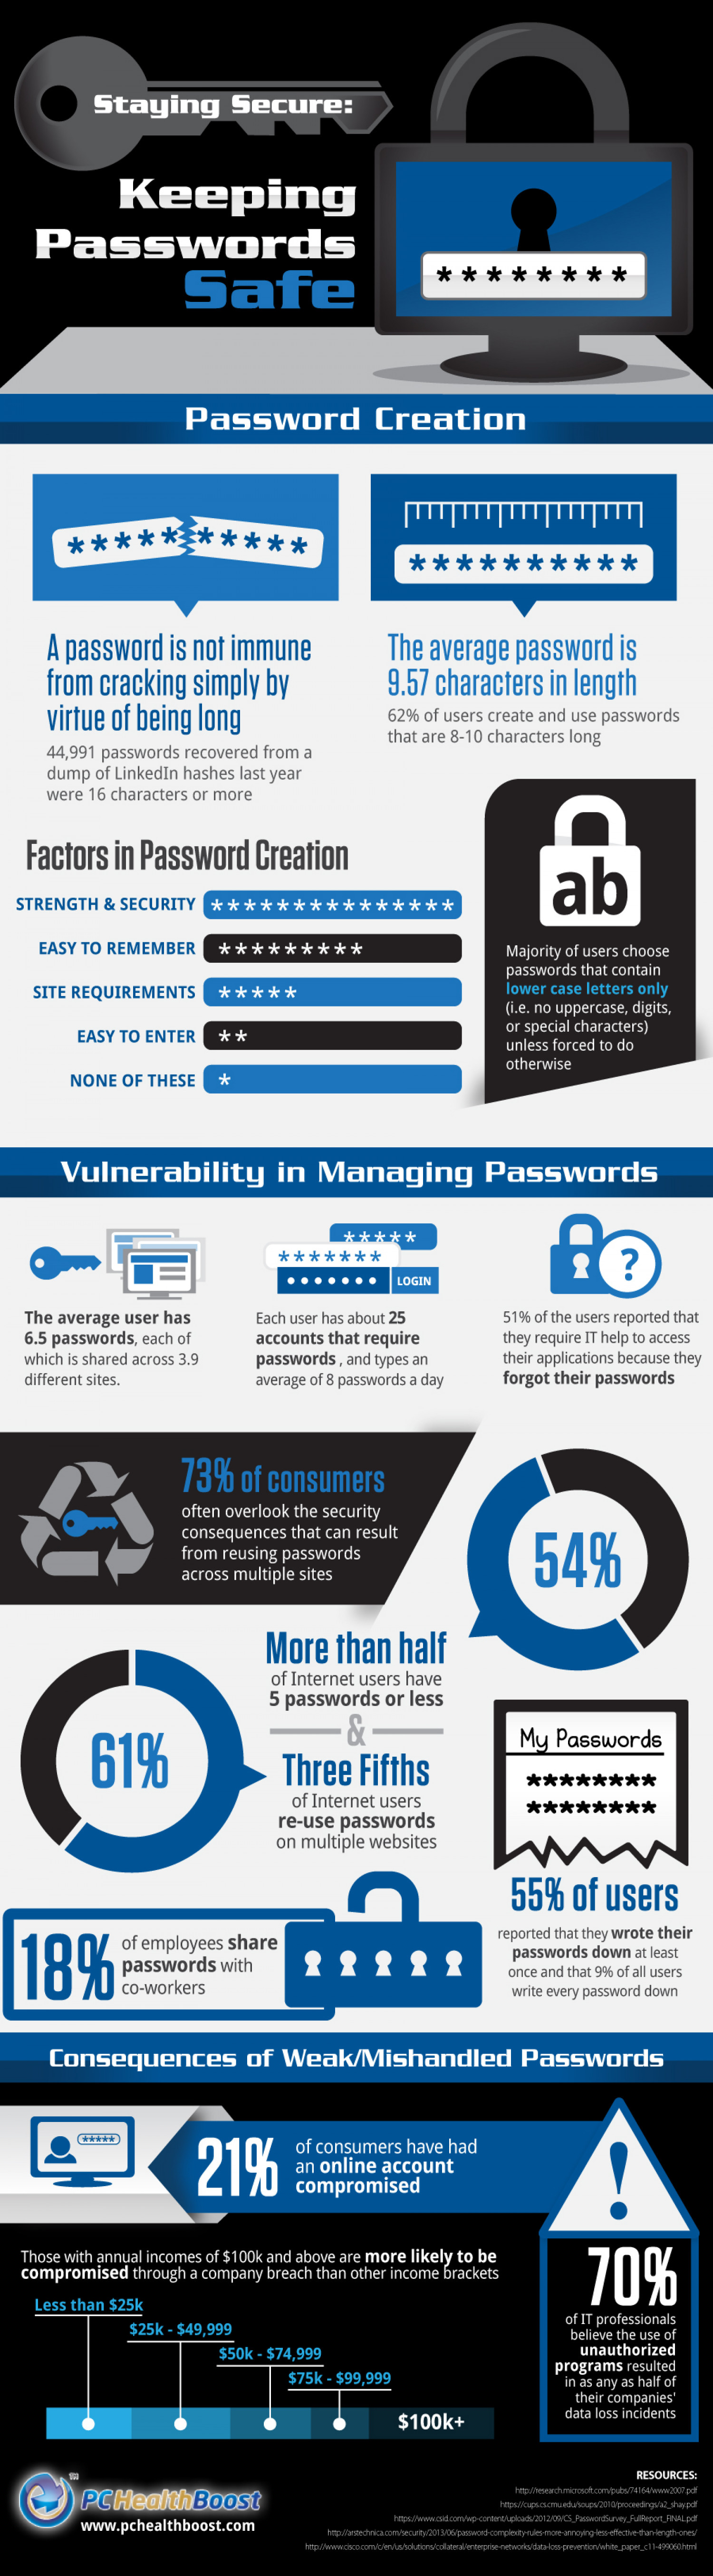 Staying Secure: Keeping Passwords Safe Infographic